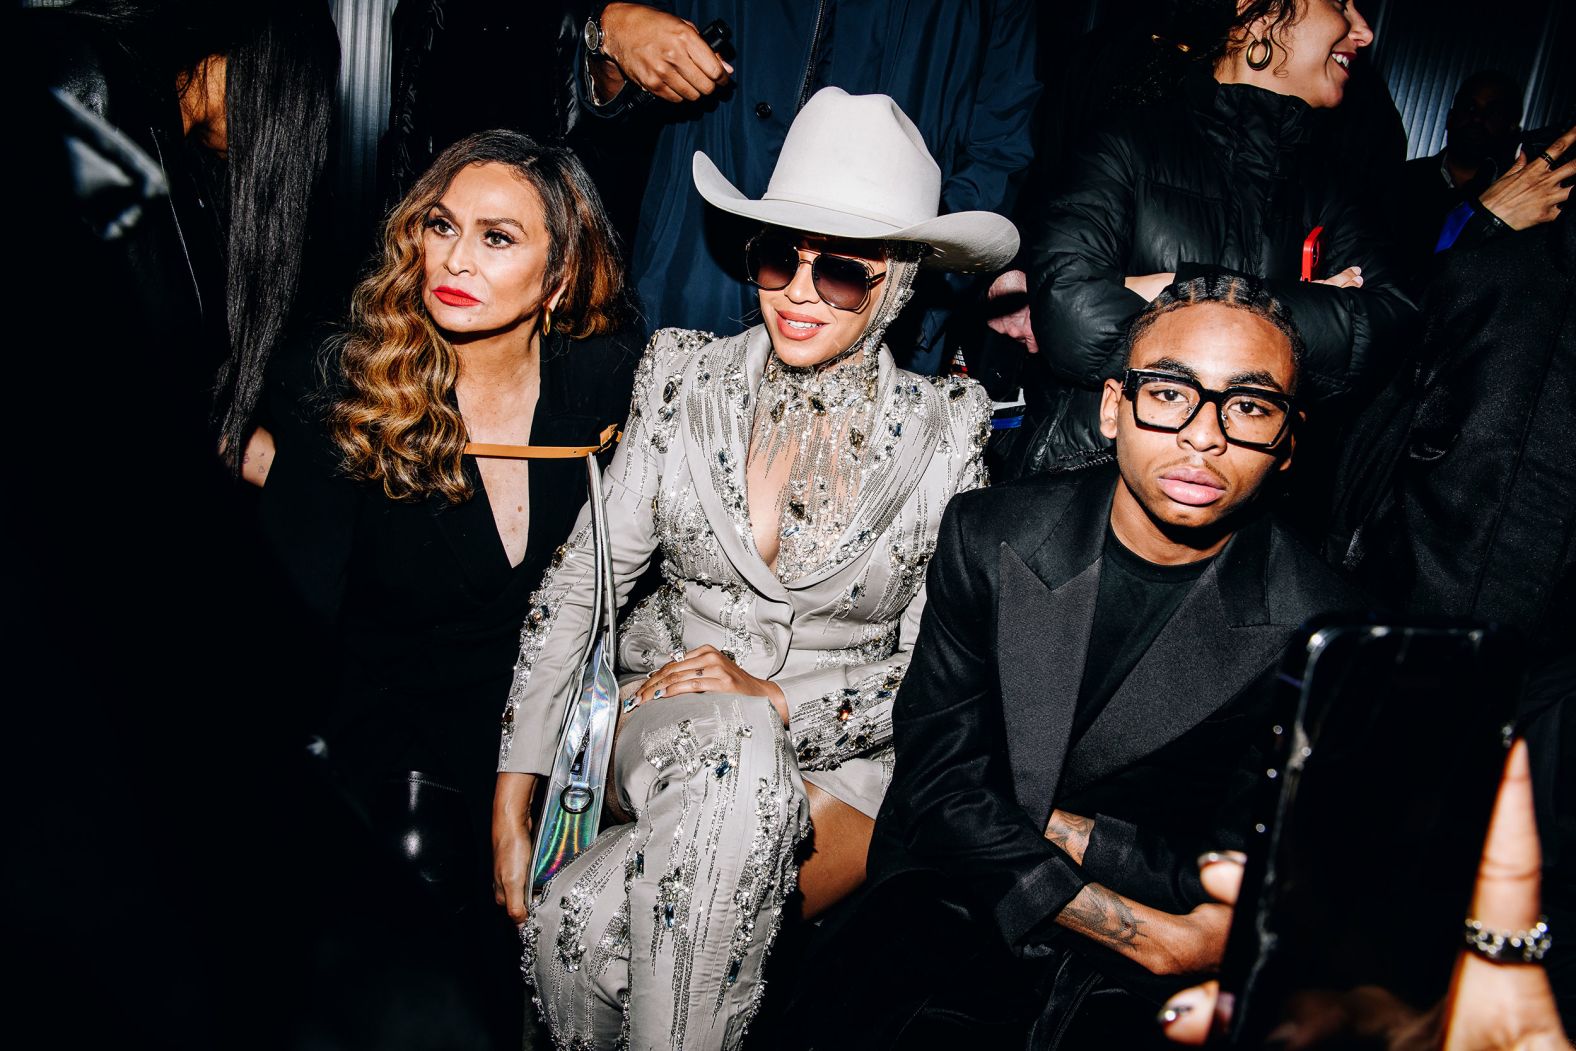 Singer Beyoncé, center, makes a surprise appearance at a Luar fashion show in New York with her mother, Tina Knowles, on Tuesday, February 13.